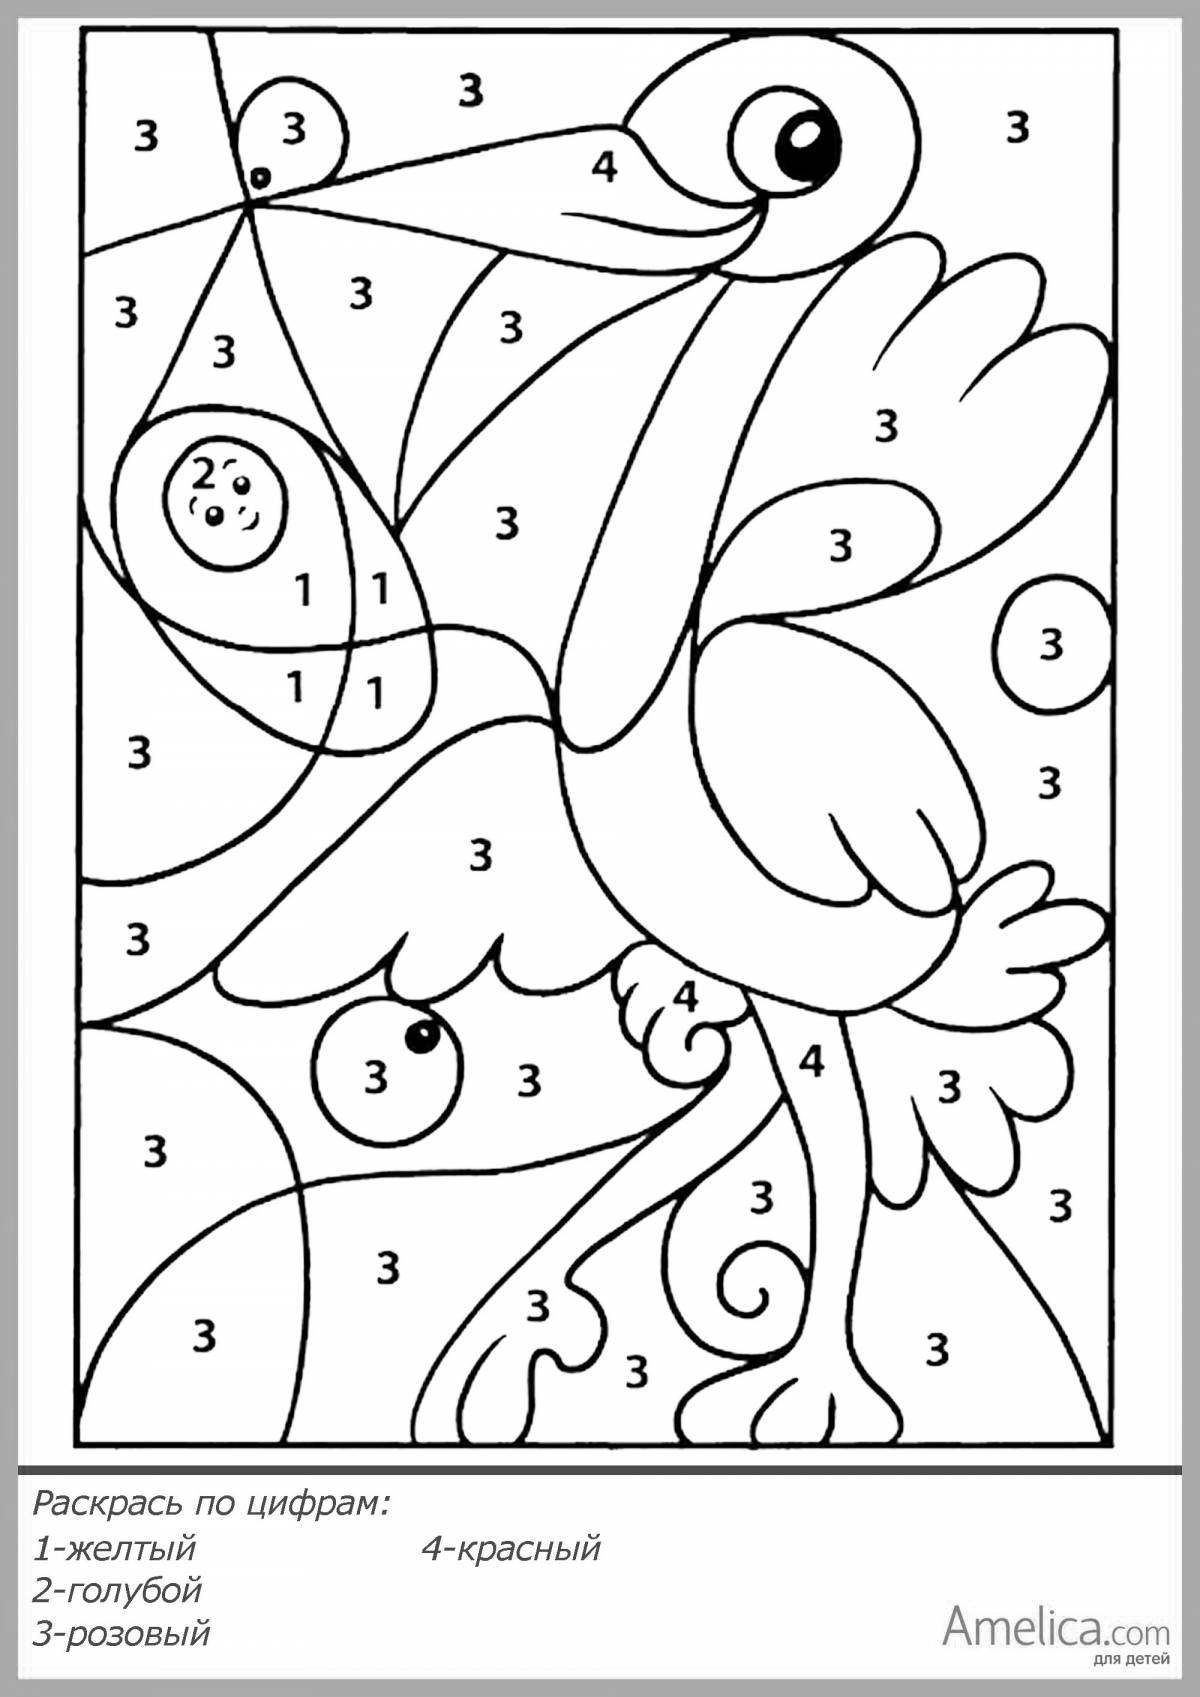 Fun coloring by numbers 2